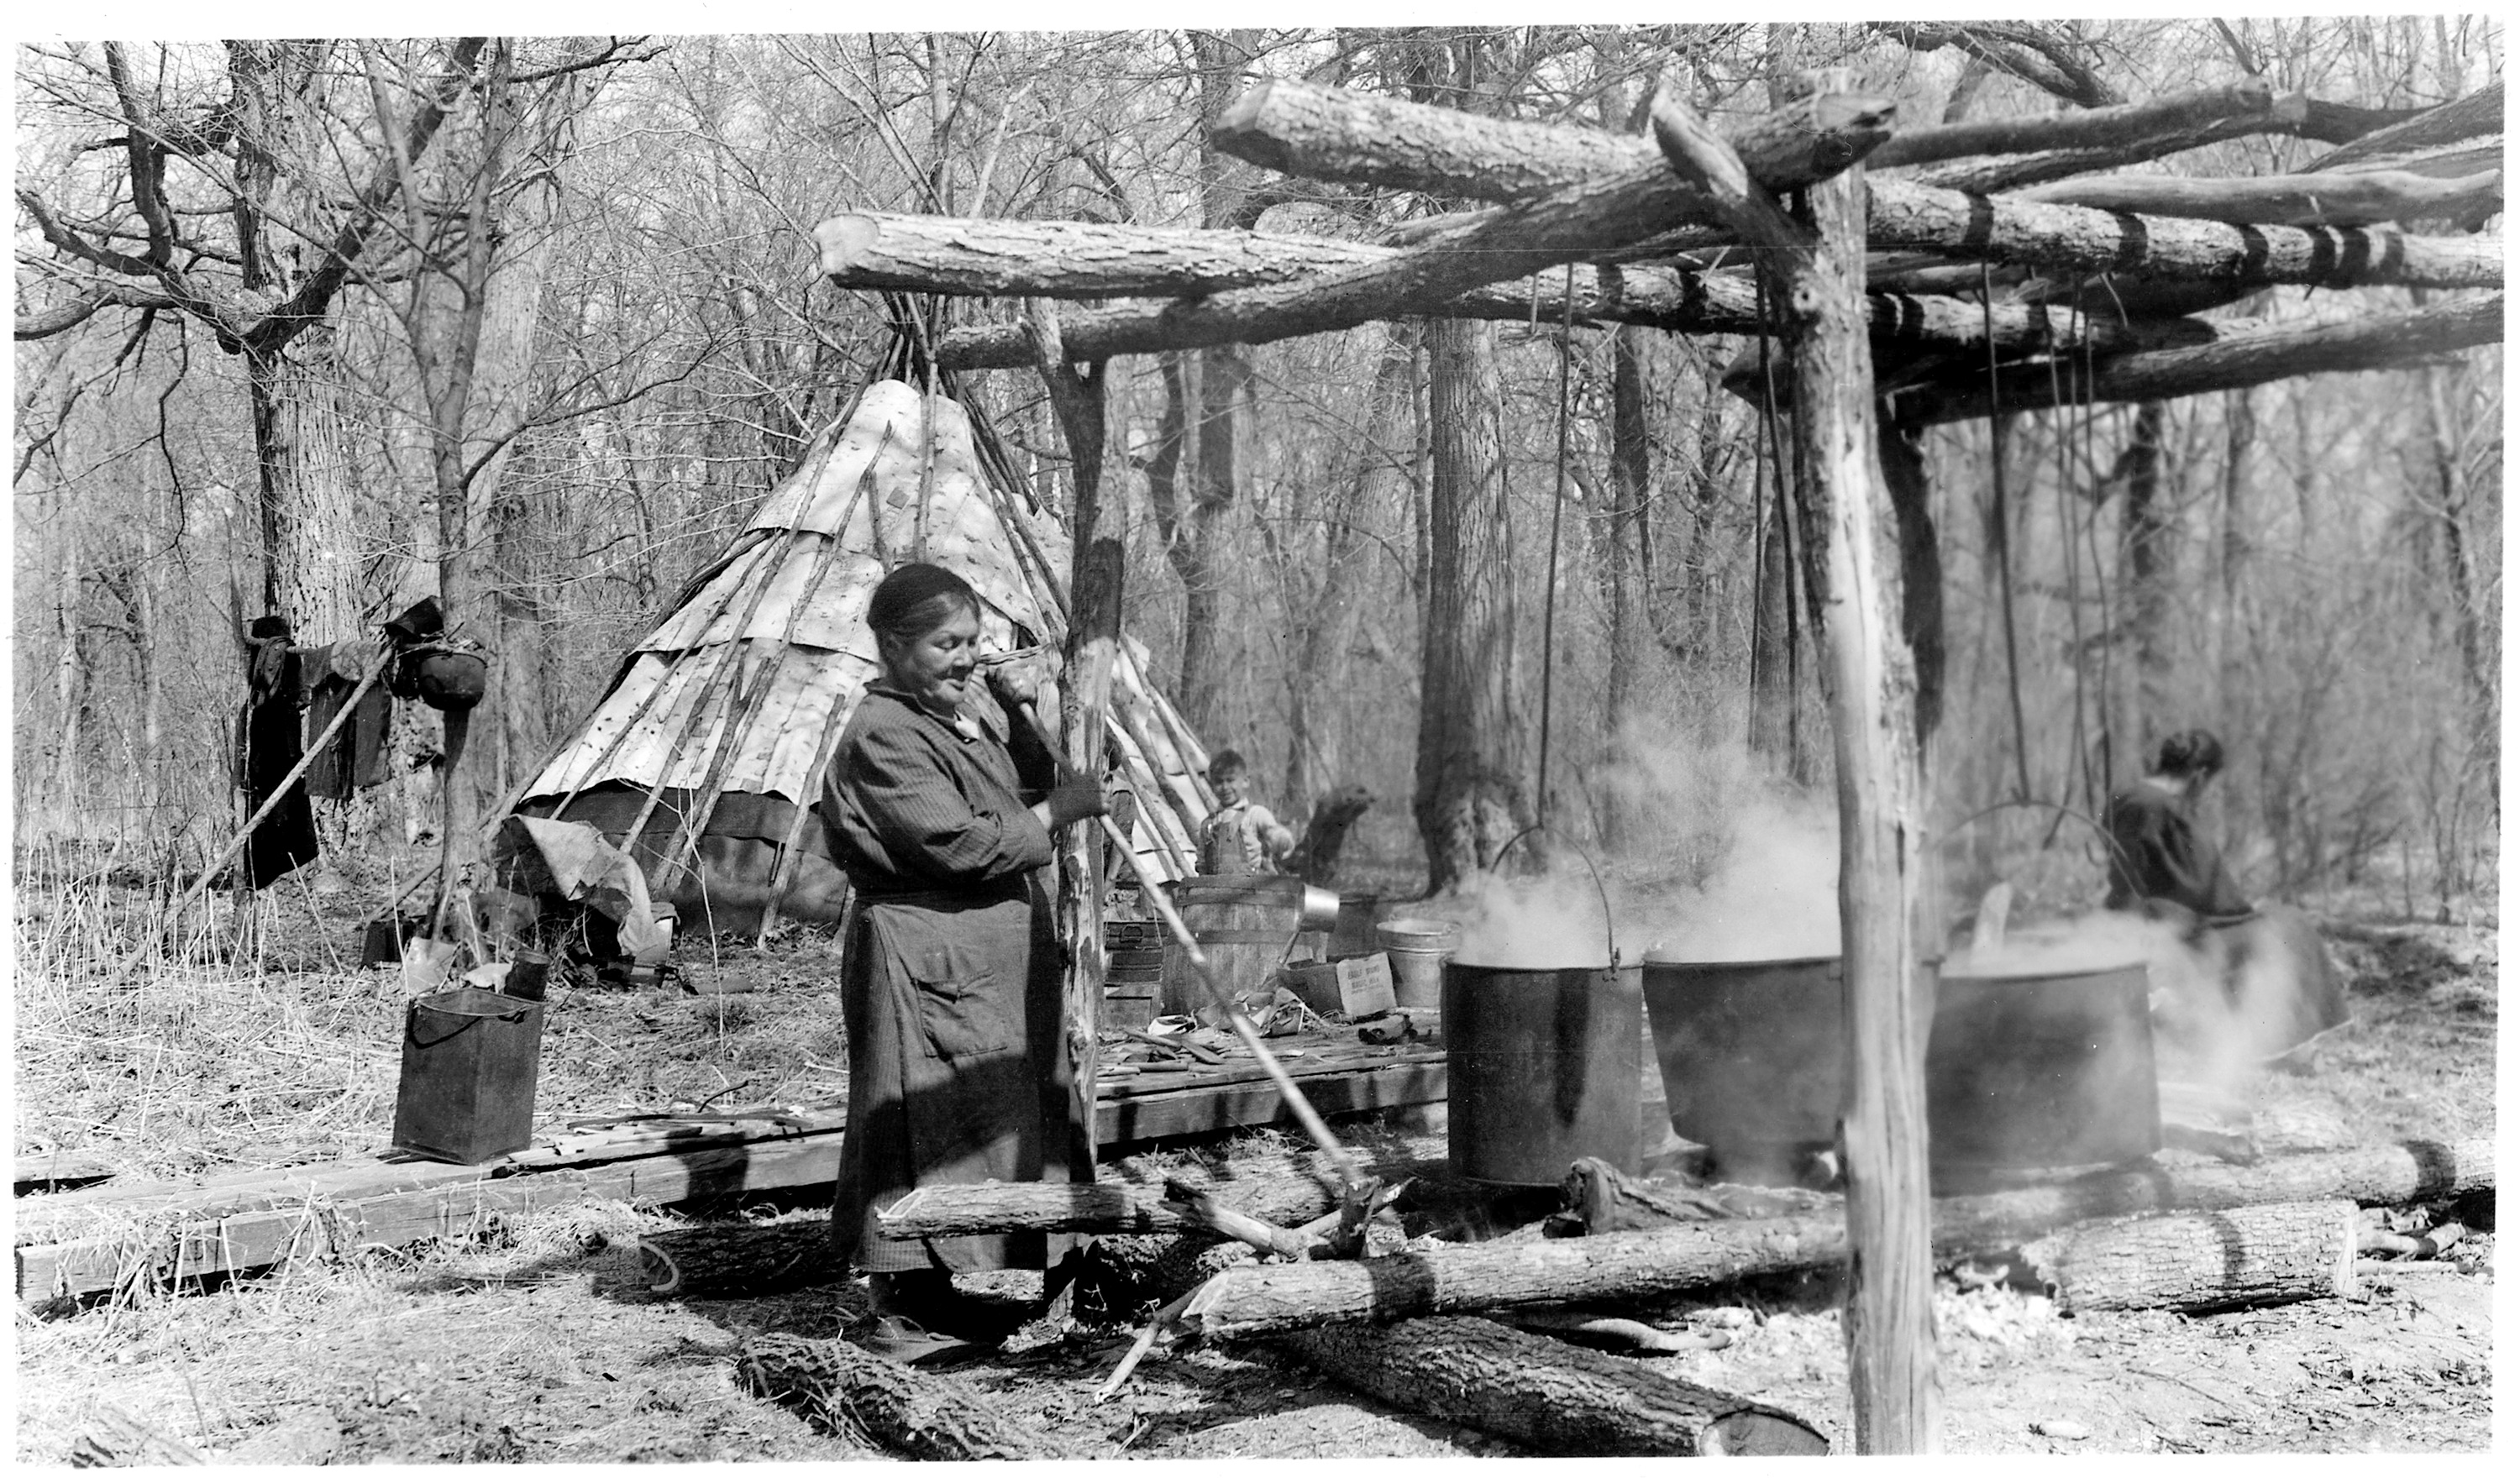 maplesugarindustrywildfoodism.jpg Google image from https://wildfoodism.com/2014/03/05/nutritional-differences-between-maple-syrup-grades-which-is-best/